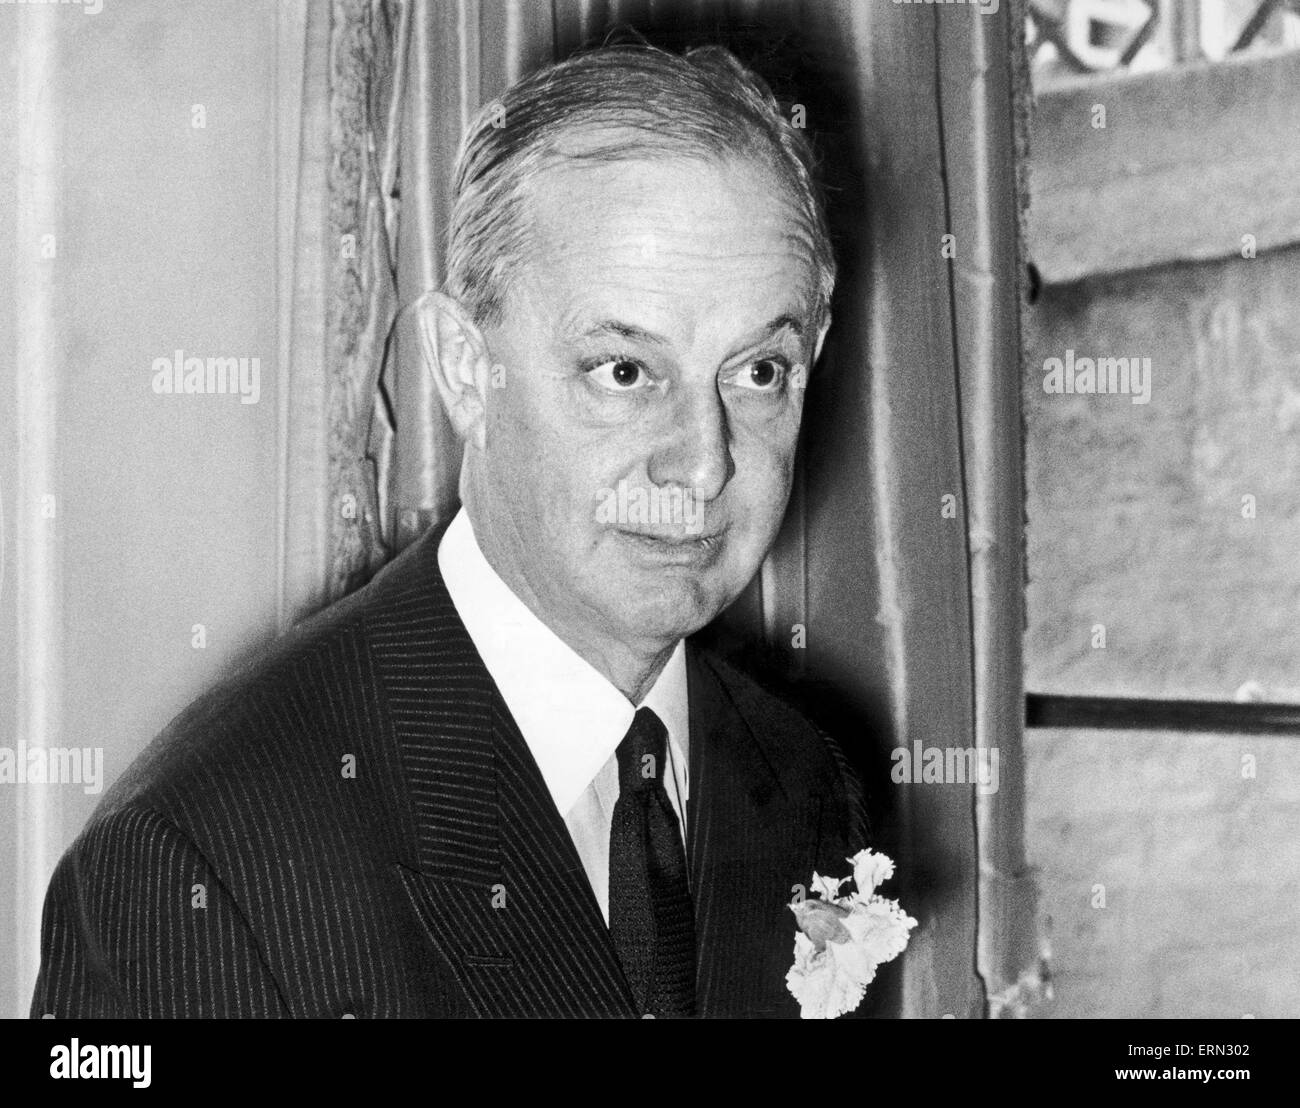 William Waldorf Astor III, 4th Viscount Astor (born December 27, 1951) is a British businessman and politician who sits as an elected hereditary peer in the House of Lords. (Picture) Lord Astor at standing conference of British Organisations for aid to Refugees held at Lord Astor's home. Circa 1962 Stock Photo